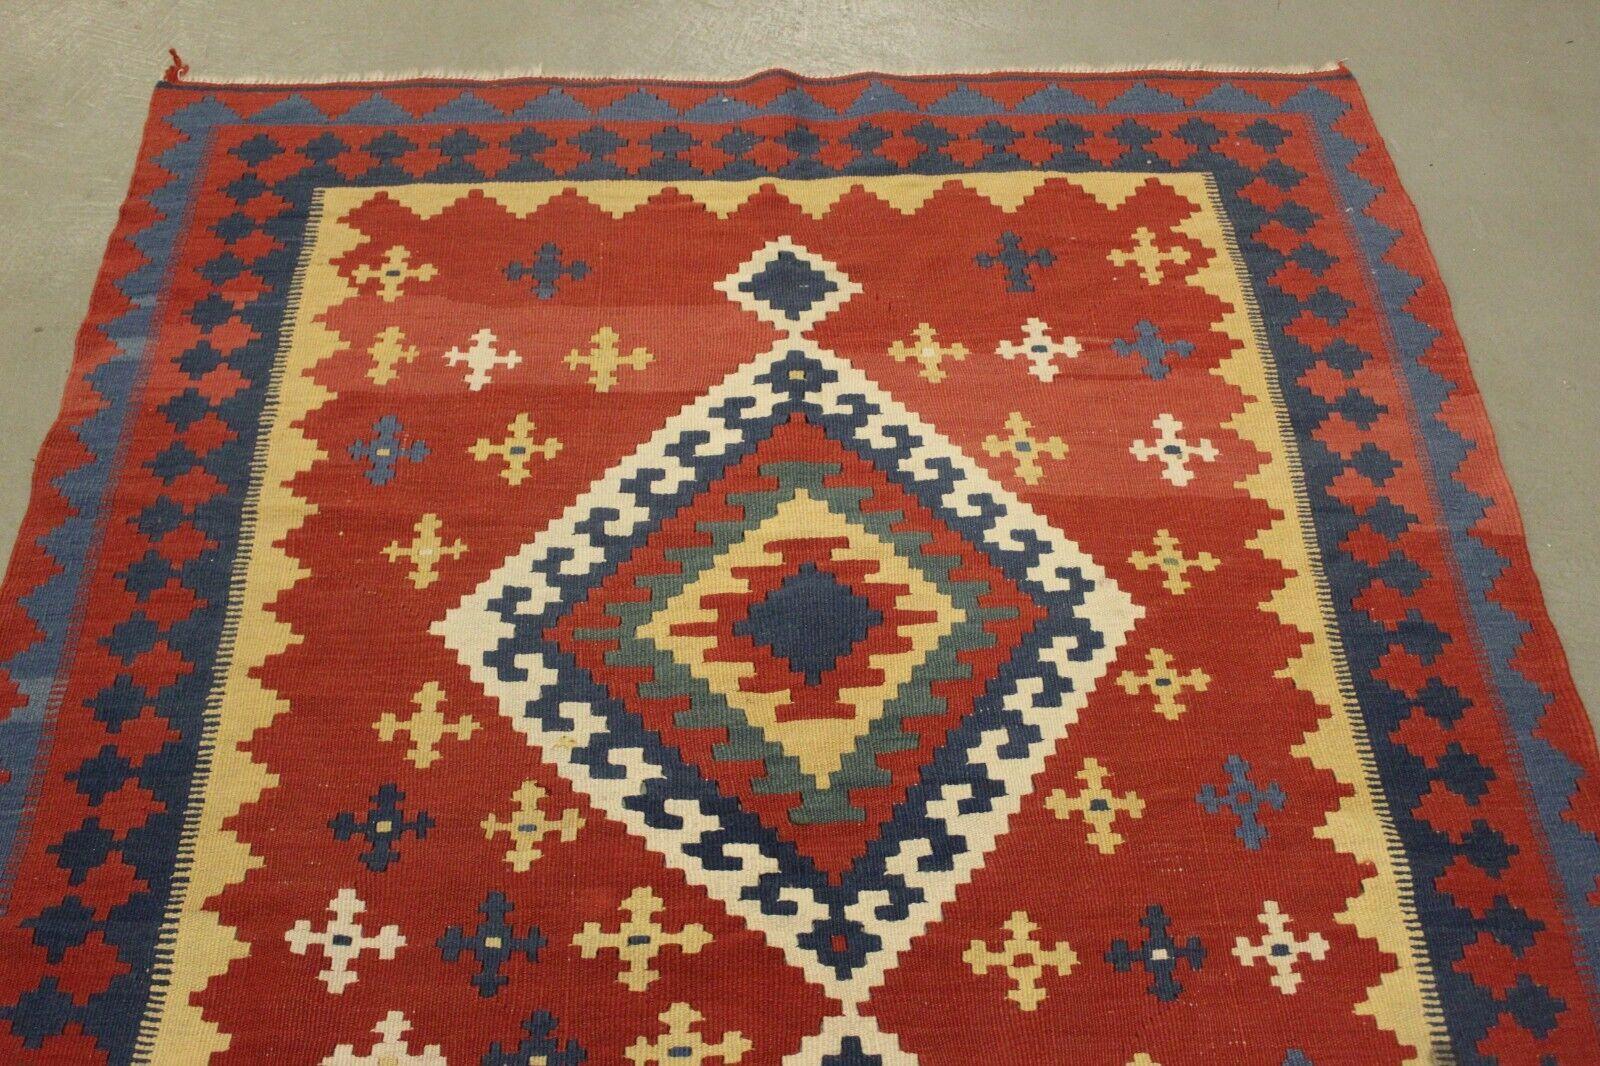 Handmade Vintage Turkish Anatolian Kilim Rug 4.4' x 6.7' 1970s - 1K26 In Good Condition For Sale In Bordeaux, FR